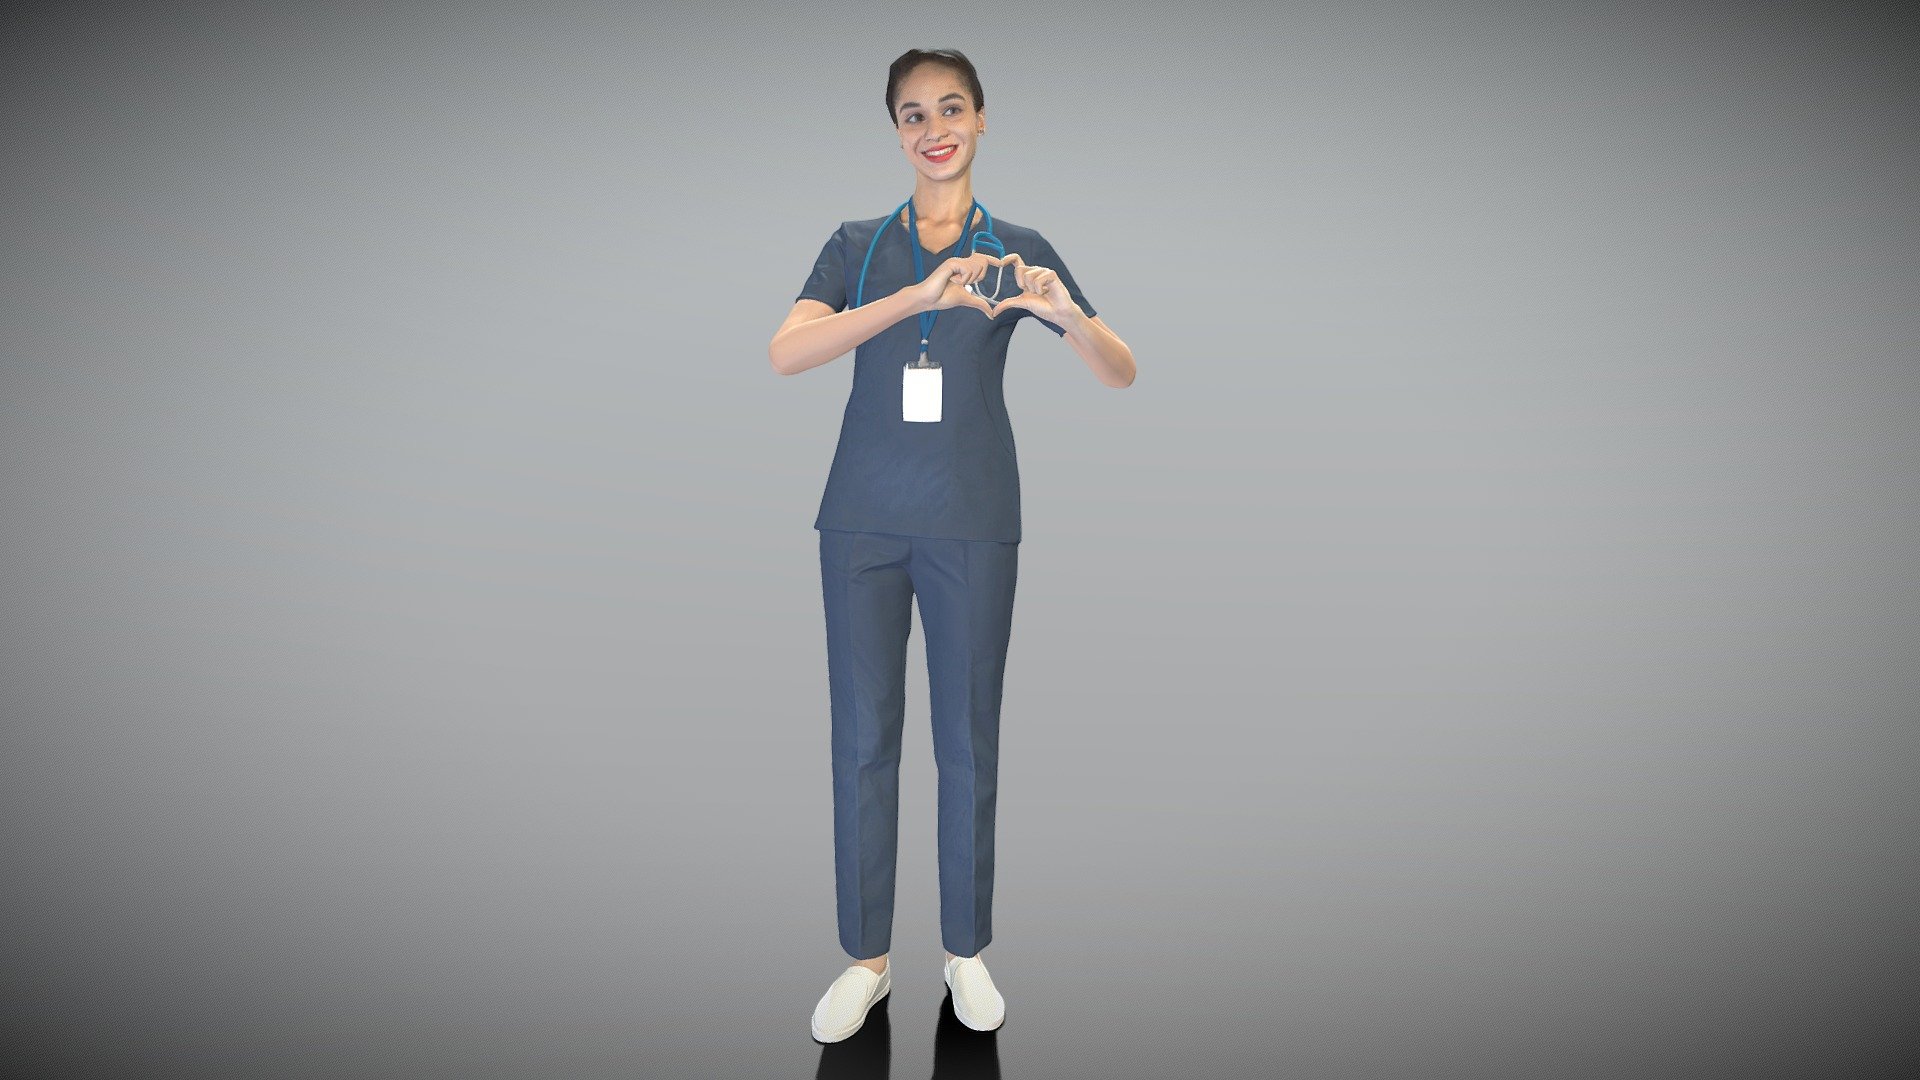 This is a true human size and detailed model of a beautiful young woman of Caucasian appearance dressed in a medical uniform. The model is captured in typical professional pose to perfectly match a variety of architectural and product visualizations, be used as a background or mid-sized character in advert banners, professional products/devices presentations, educational tutorials, VR/AR content etc.

Technical characteristics:




digital double 3d scan model

decimated model (100k triangles)

sufficiently clean

PBR textures: Diffuse, Normal, Specular maps

non-overlapping UV map

Download package includes Cinema 4D project file with Redshift shader, OBJ, FBX files, which are applicable for 3ds Max, Maya, Unreal Engine, Unity, Blender, etc.

You may find some of our 3d models in free access on SketchFab https://sketchfab.com/deep3dstudio/collections/sample-basic-3d-models

New 3d models every day! - Beautiful female doctor smiling 308 - Buy Royalty Free 3D model by deep3dstudio 3d model